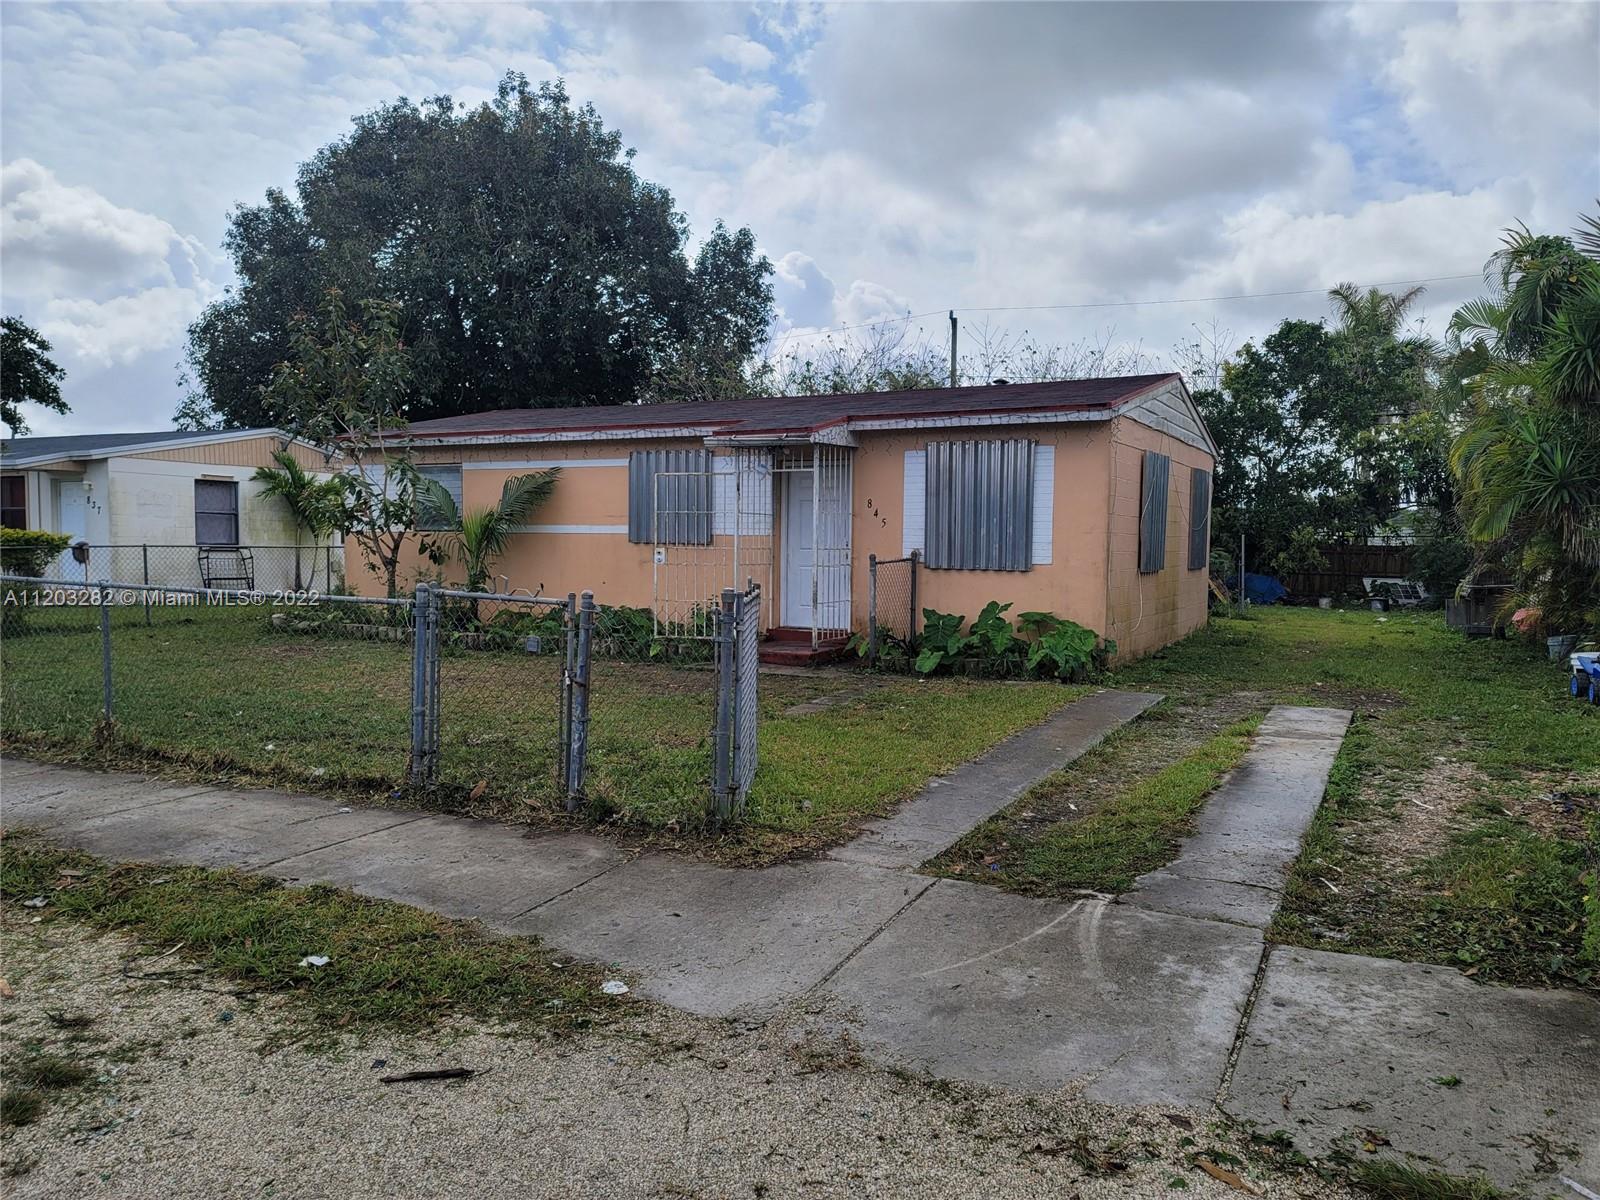 Great property for Investors seeking rental property, AS IT CONDITION, 3 bedrooms, and 1 bath, SINGLE FAMILY, FENCED,  TENANTS MONTH BY MONTH. BRING YOUR BUYERS!!